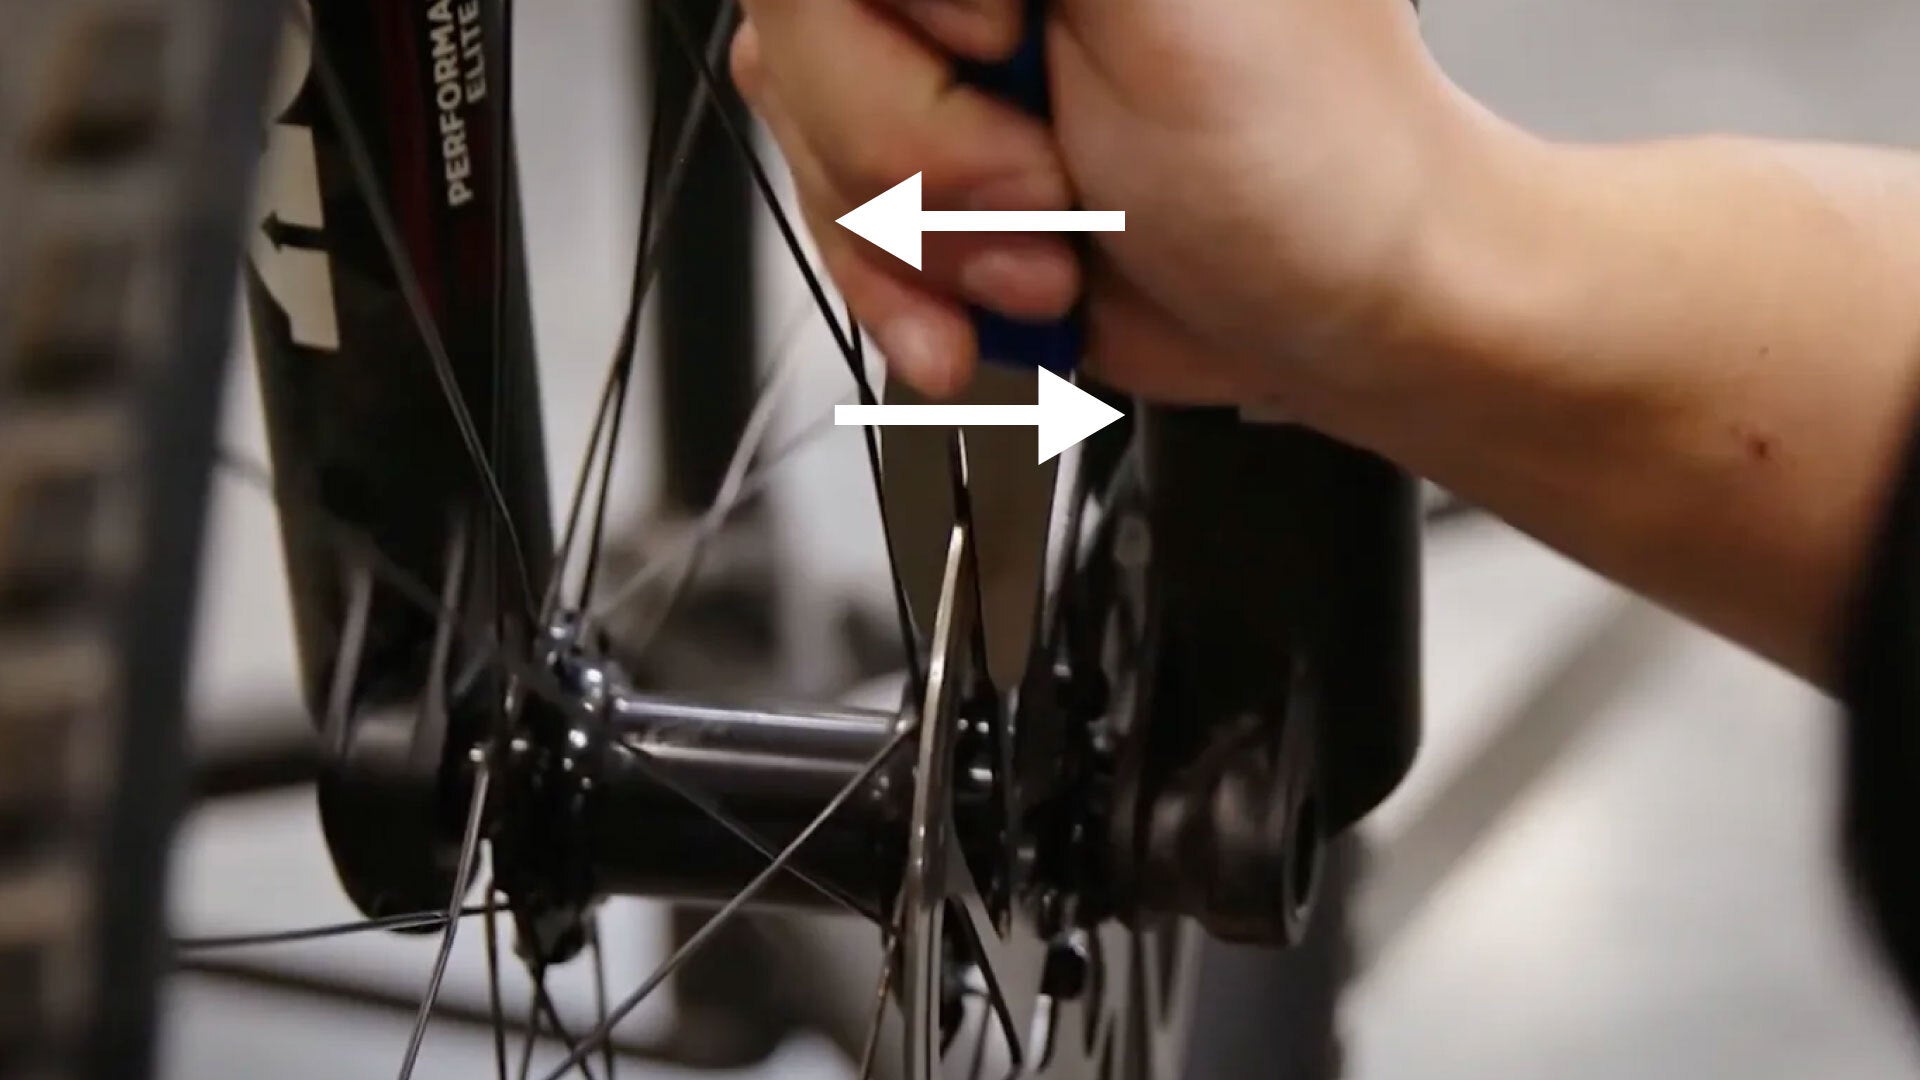 How to true or fix a bent or rubbing bike disc brake rotor